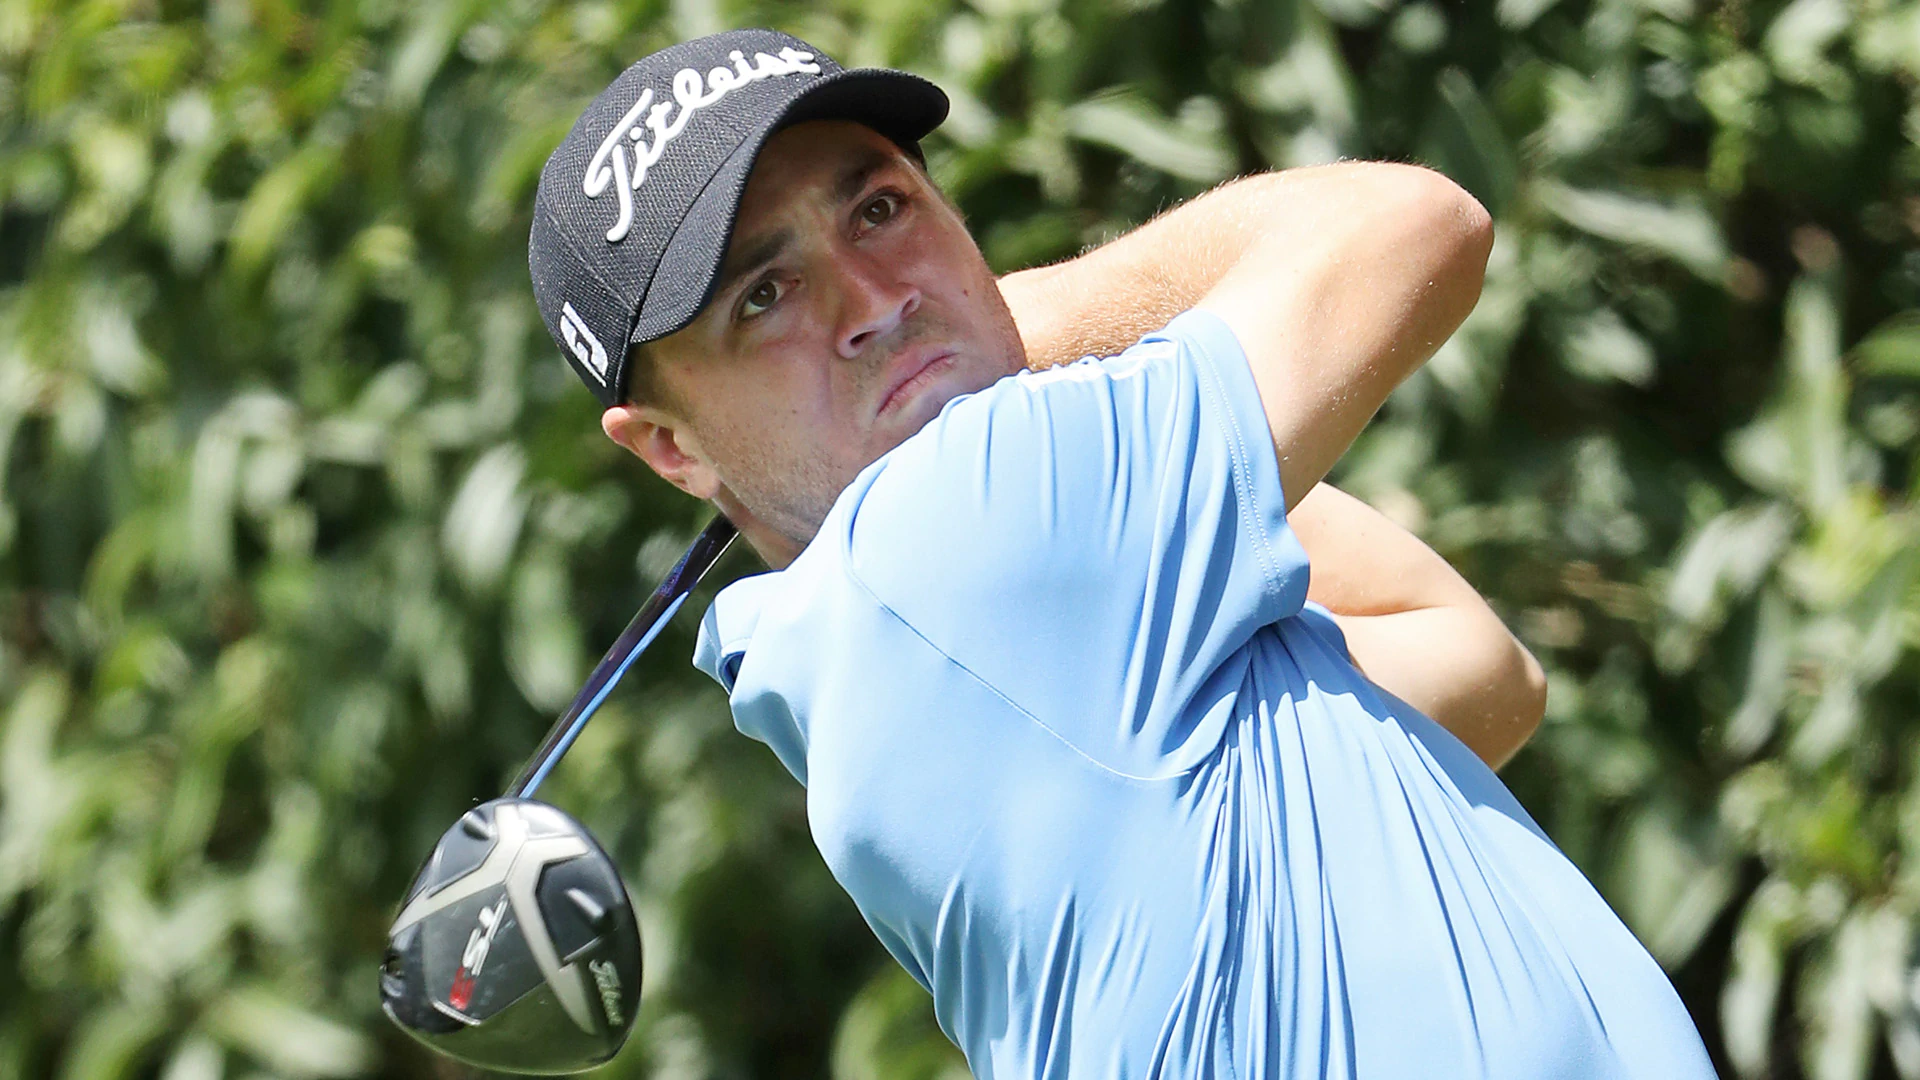 Thomas' 457-yard drive leads top 10 longest at WGC-Mexico